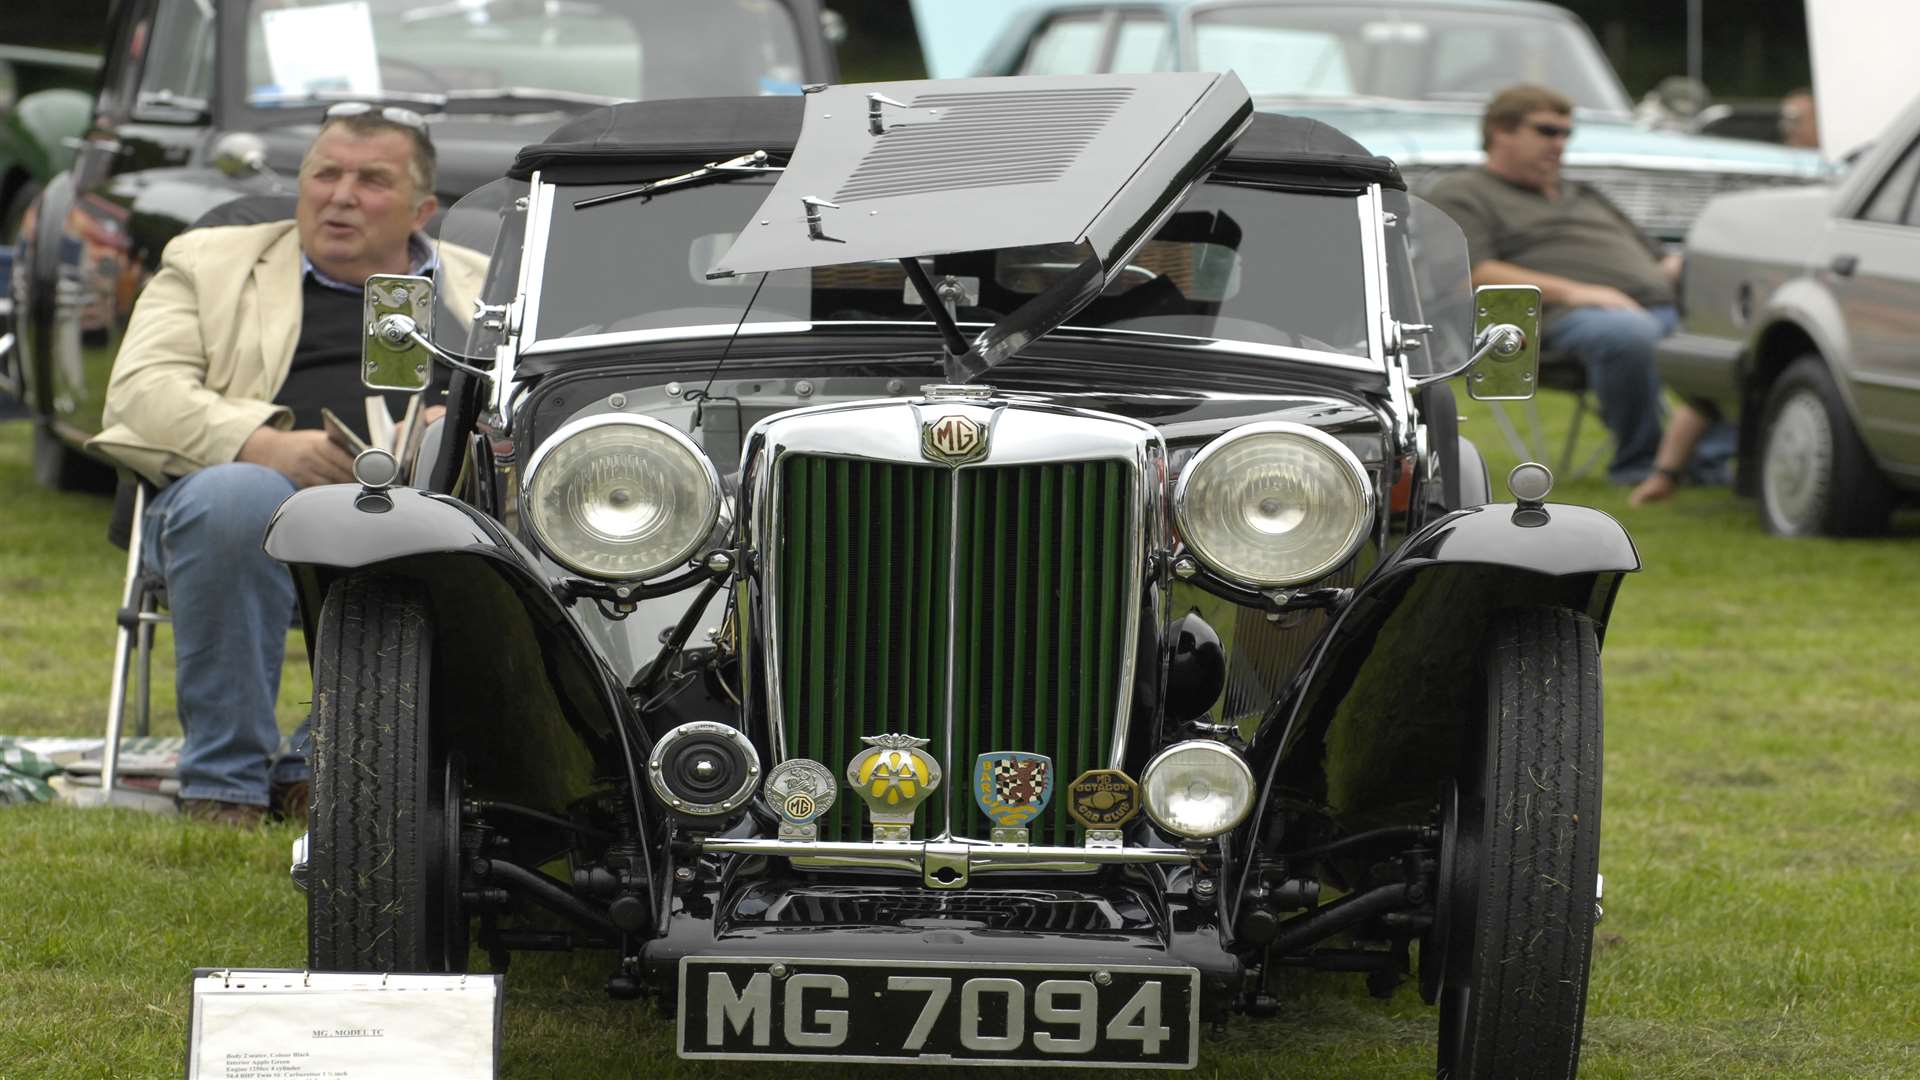 The classic car rally at the Rare Breeds Centre, Woodchurch